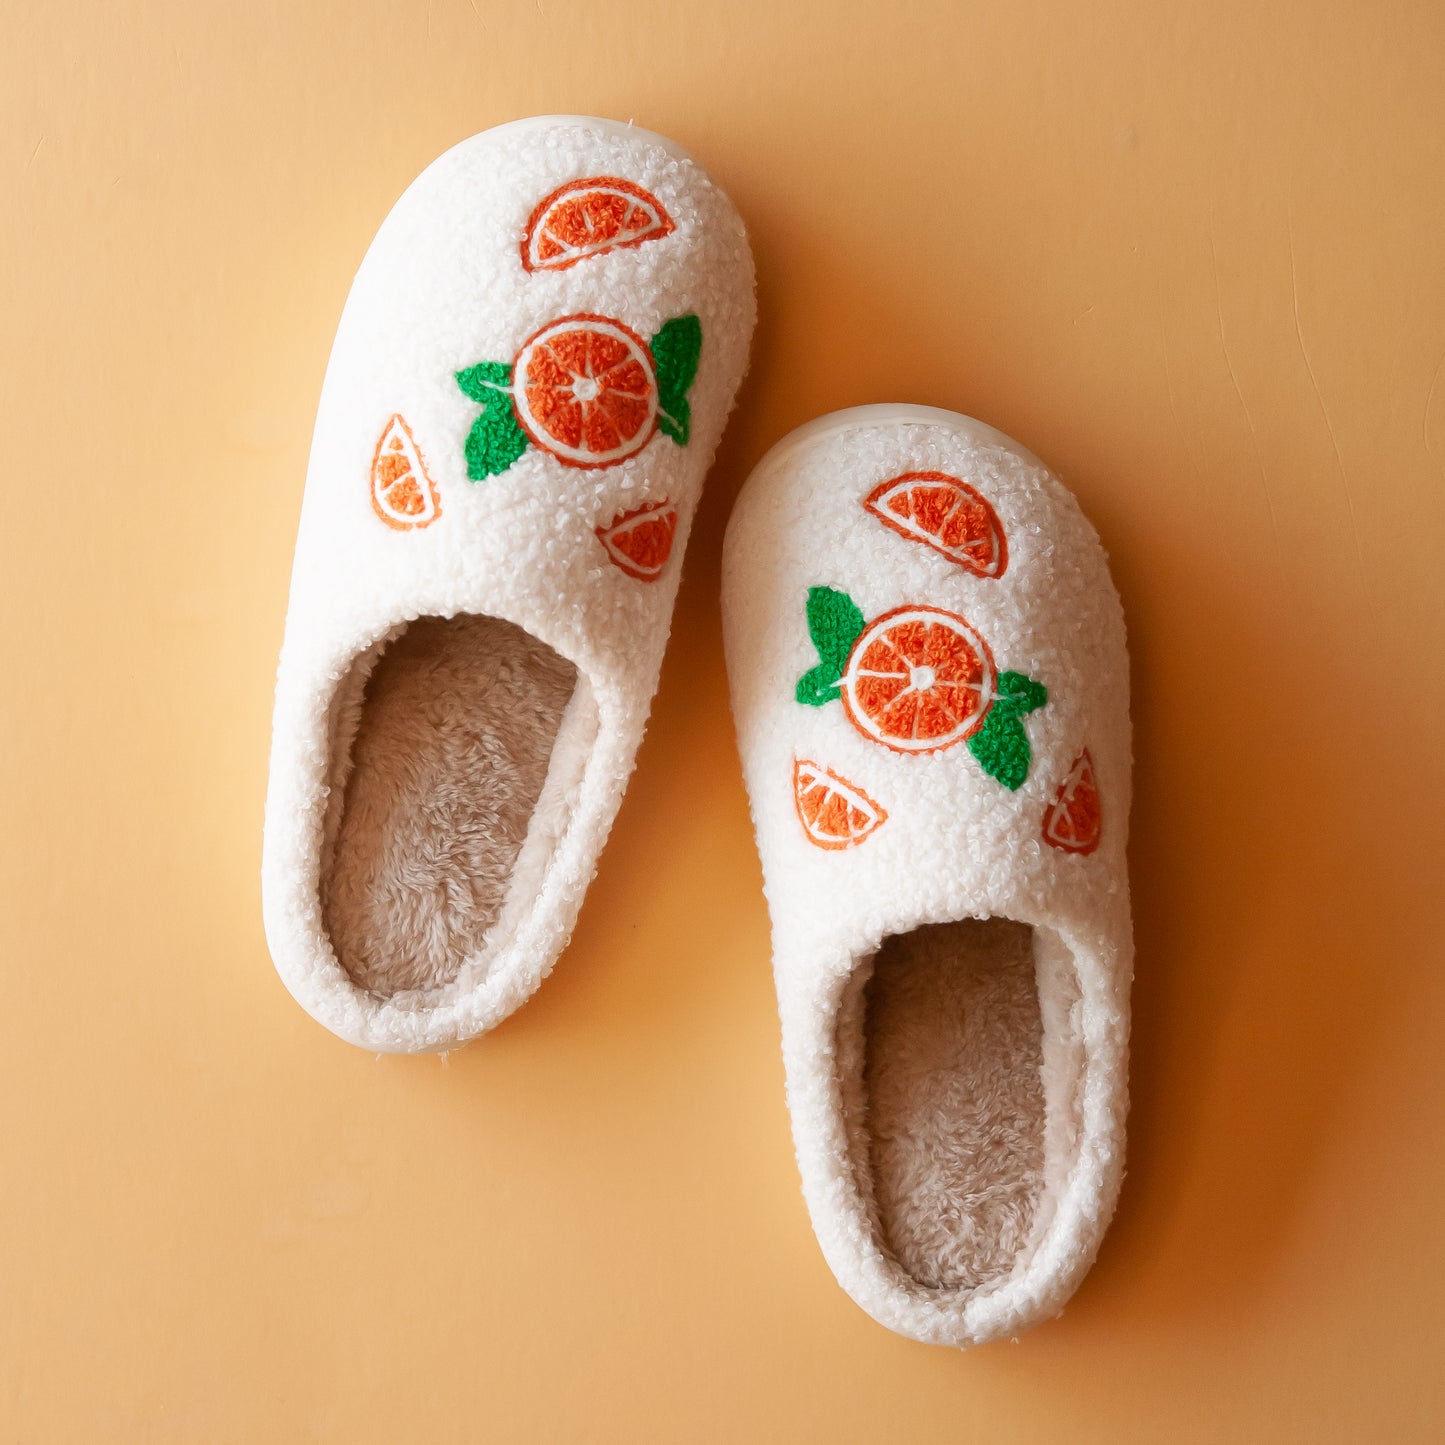 Pair of cozy slippers with custom designed oranges on each slipper, featuring a soft, plush exterior and a fluffy interior lining for maximum comfor